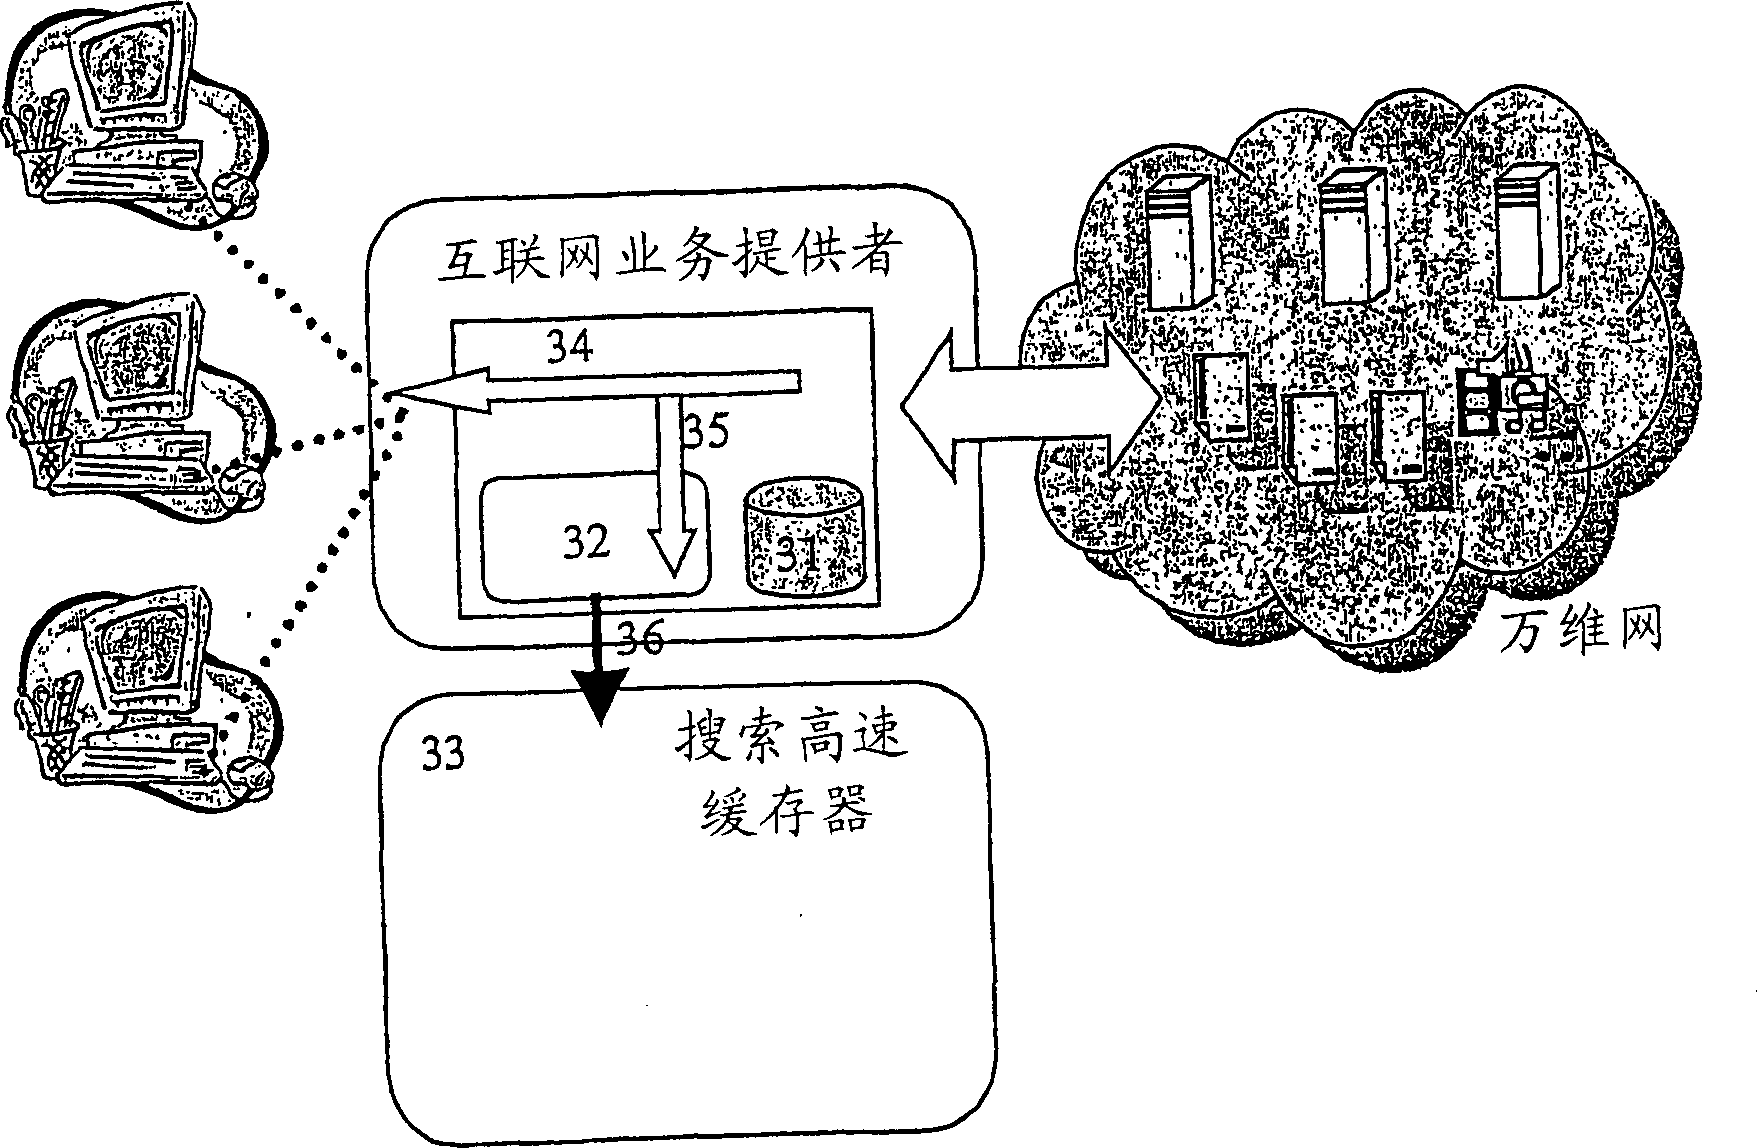 Method for searching and analyzing information in data networks